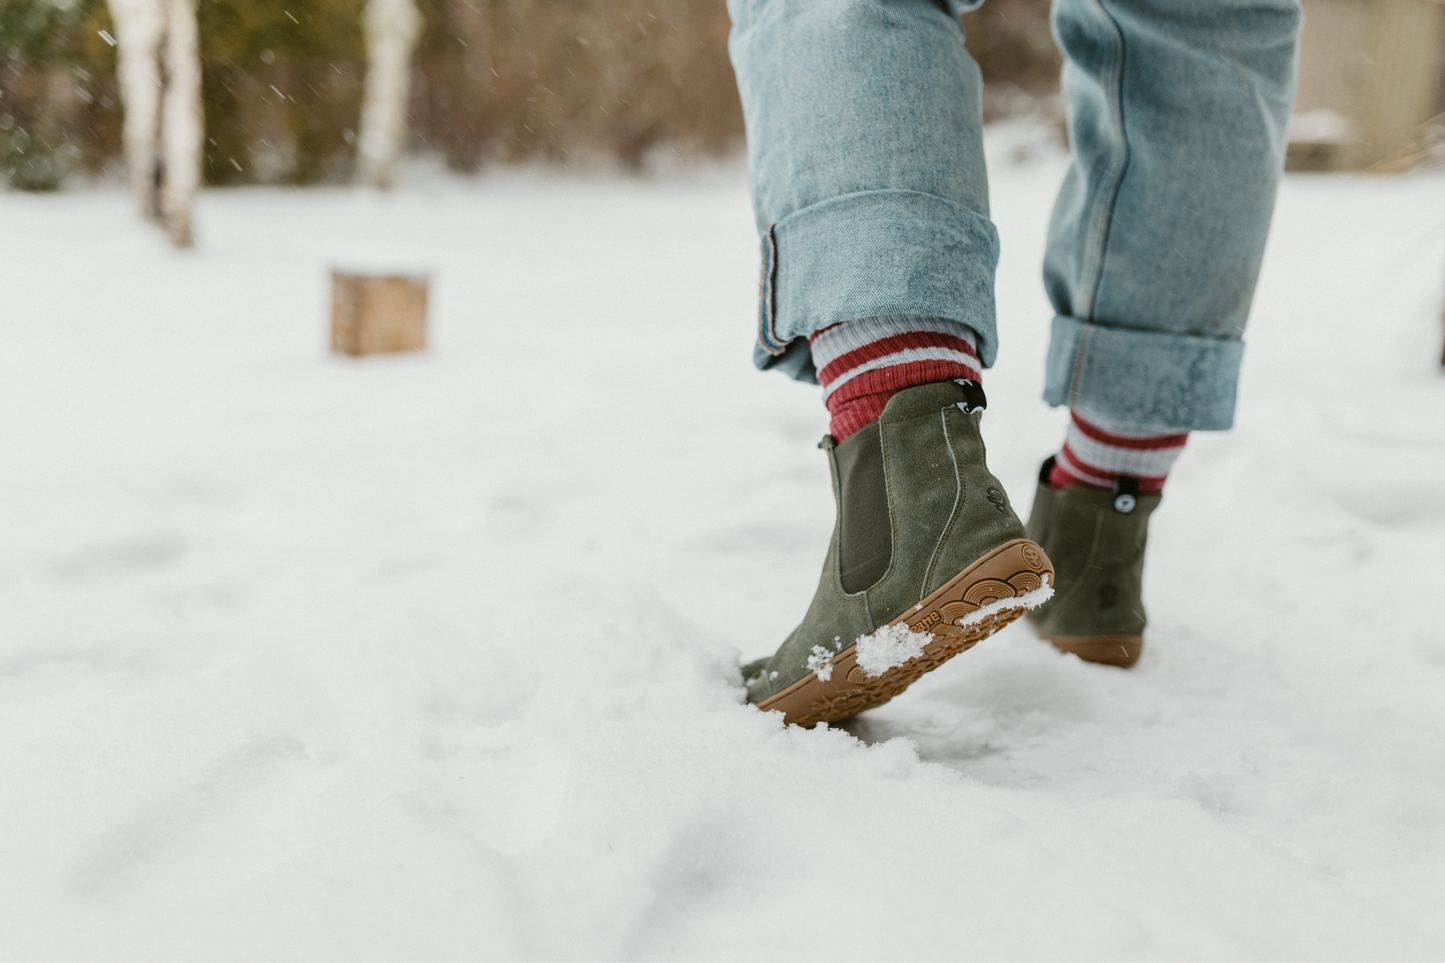 KHAKI BOOTS IN SNOW WITH HEEL LIFTED